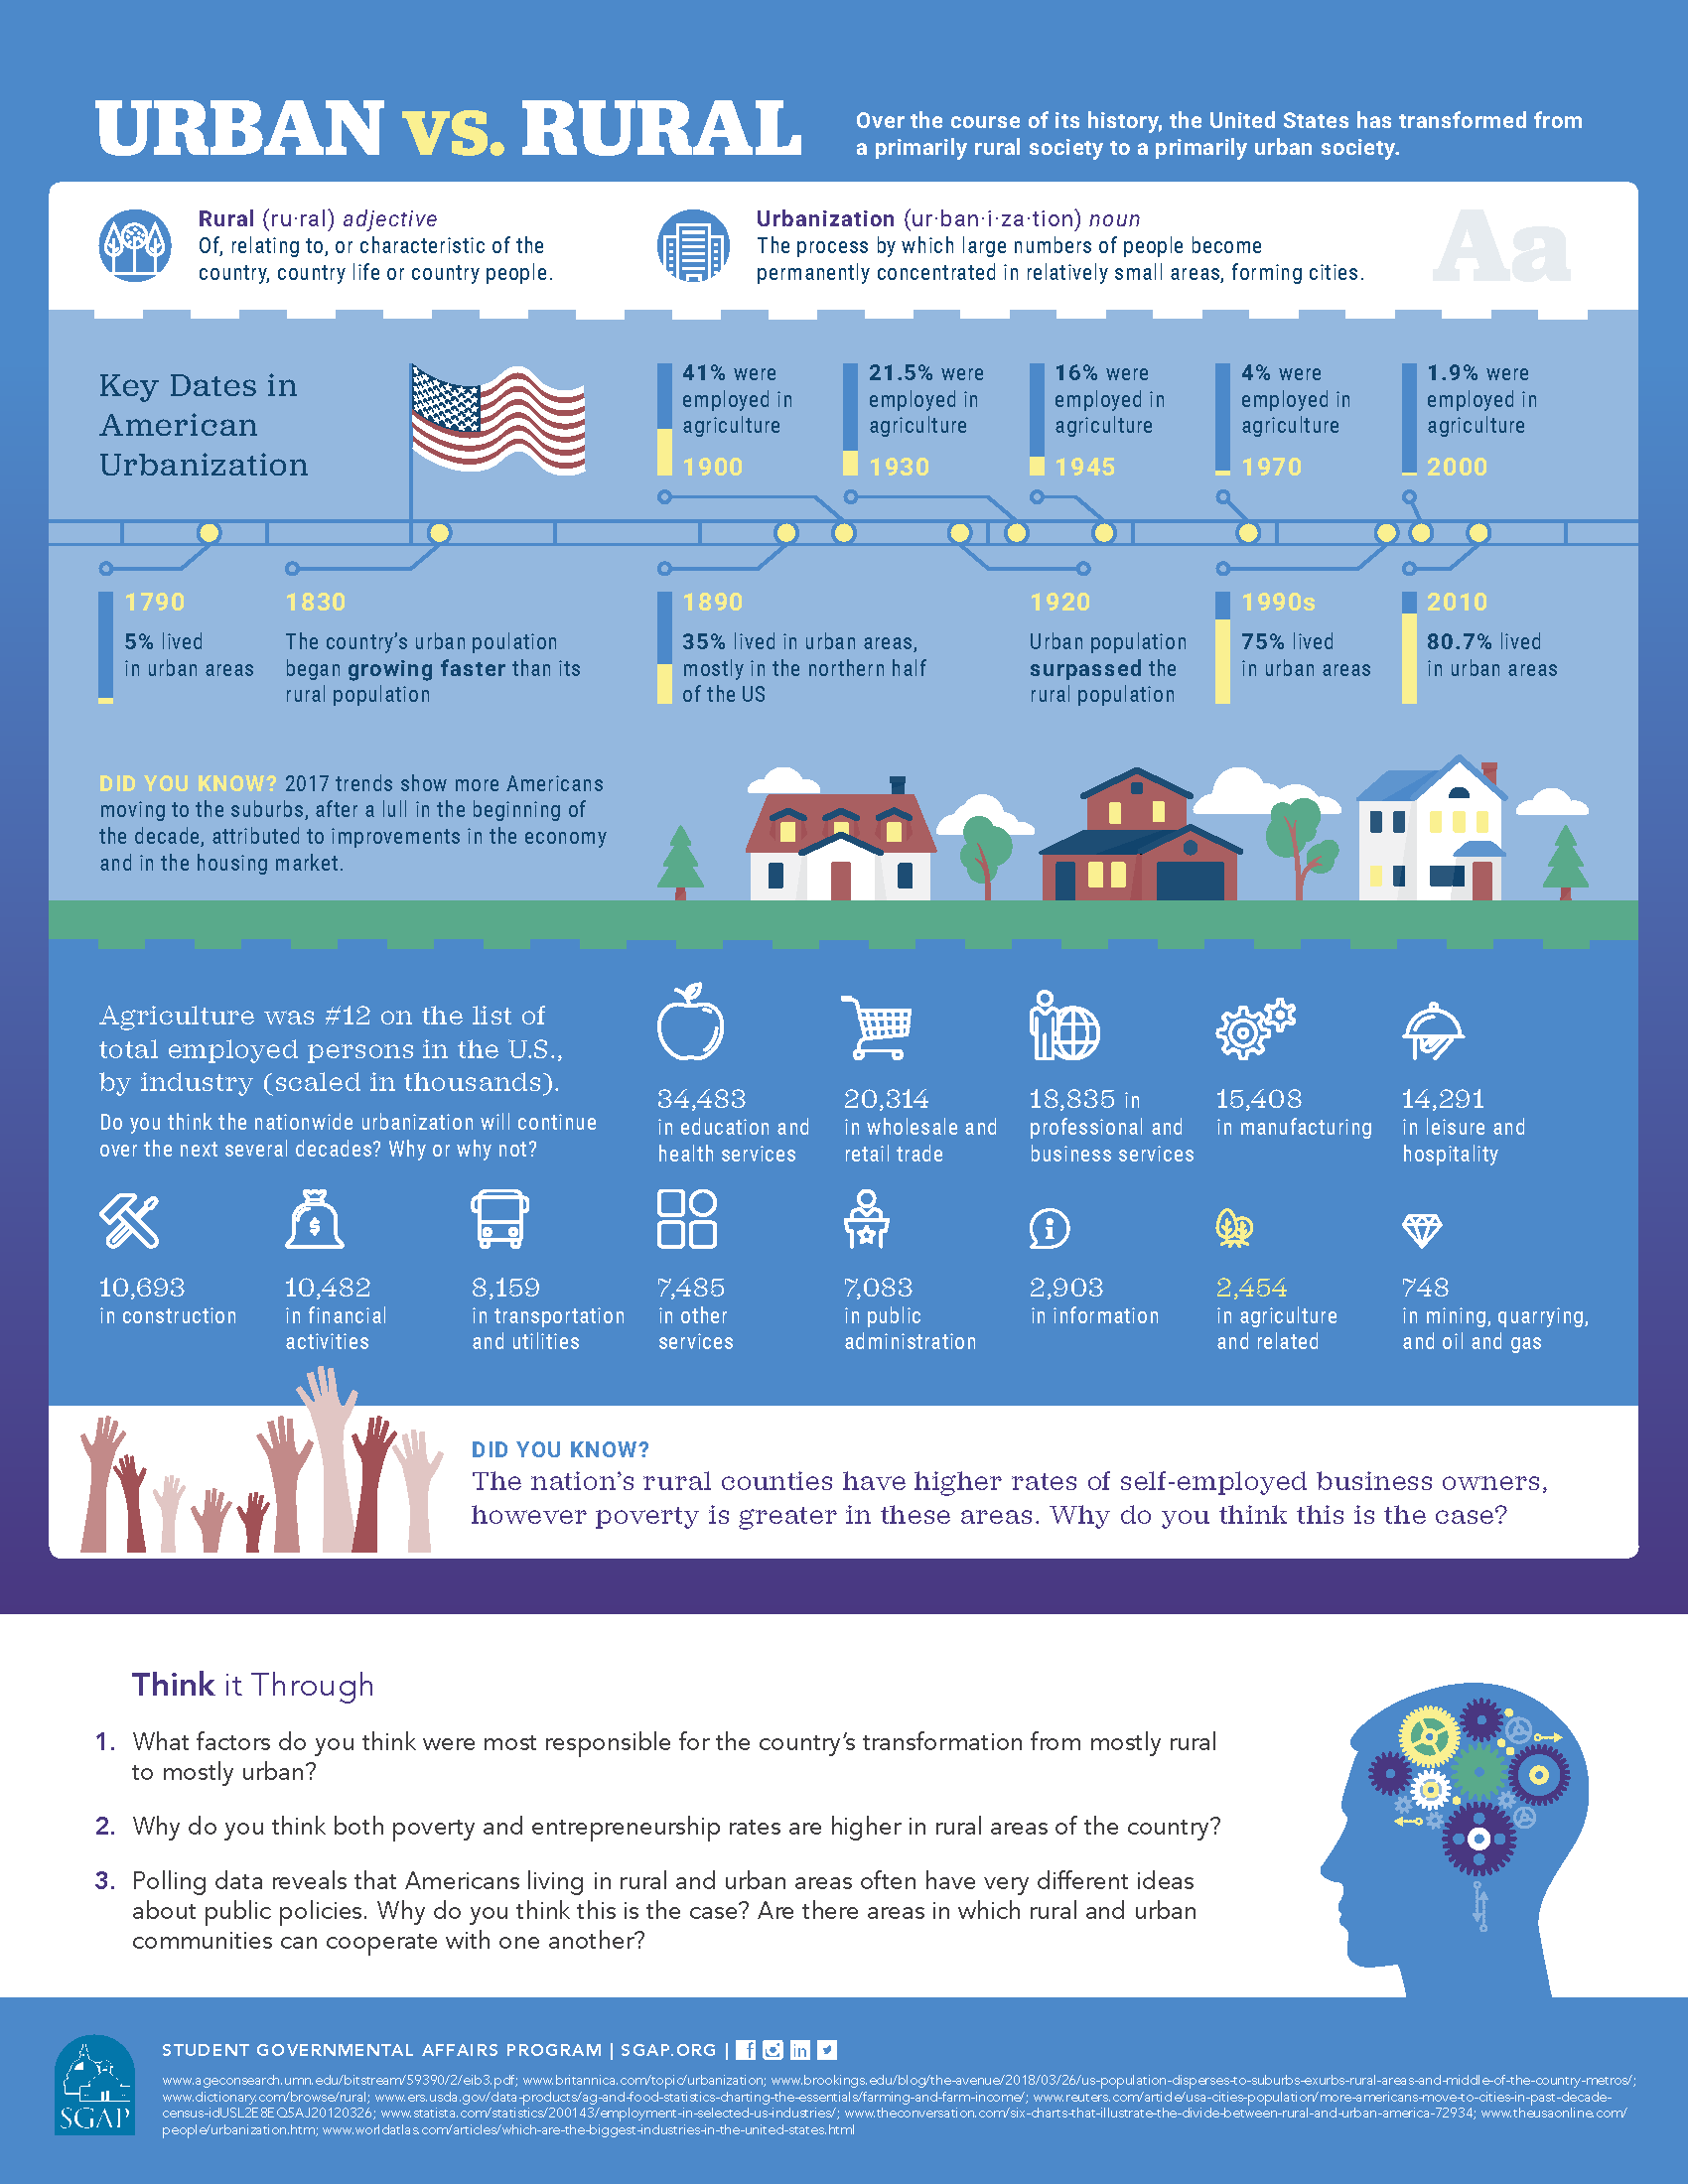 Urban vs. Rural in the United States Infographic